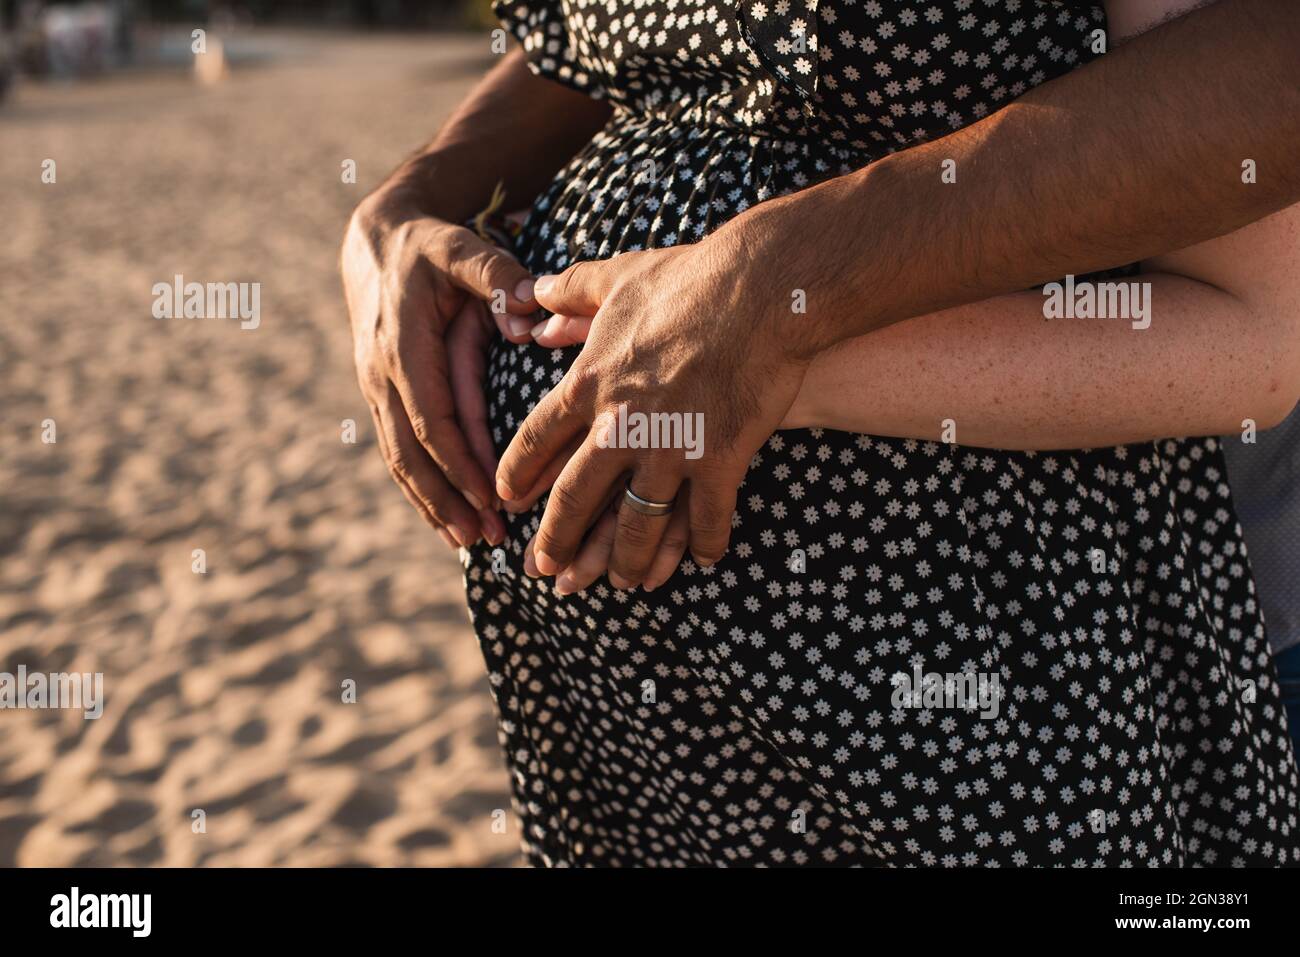 Interracial couple expecting a baby. Heart with hands on the belly of the pregnant woman. Stock Photo